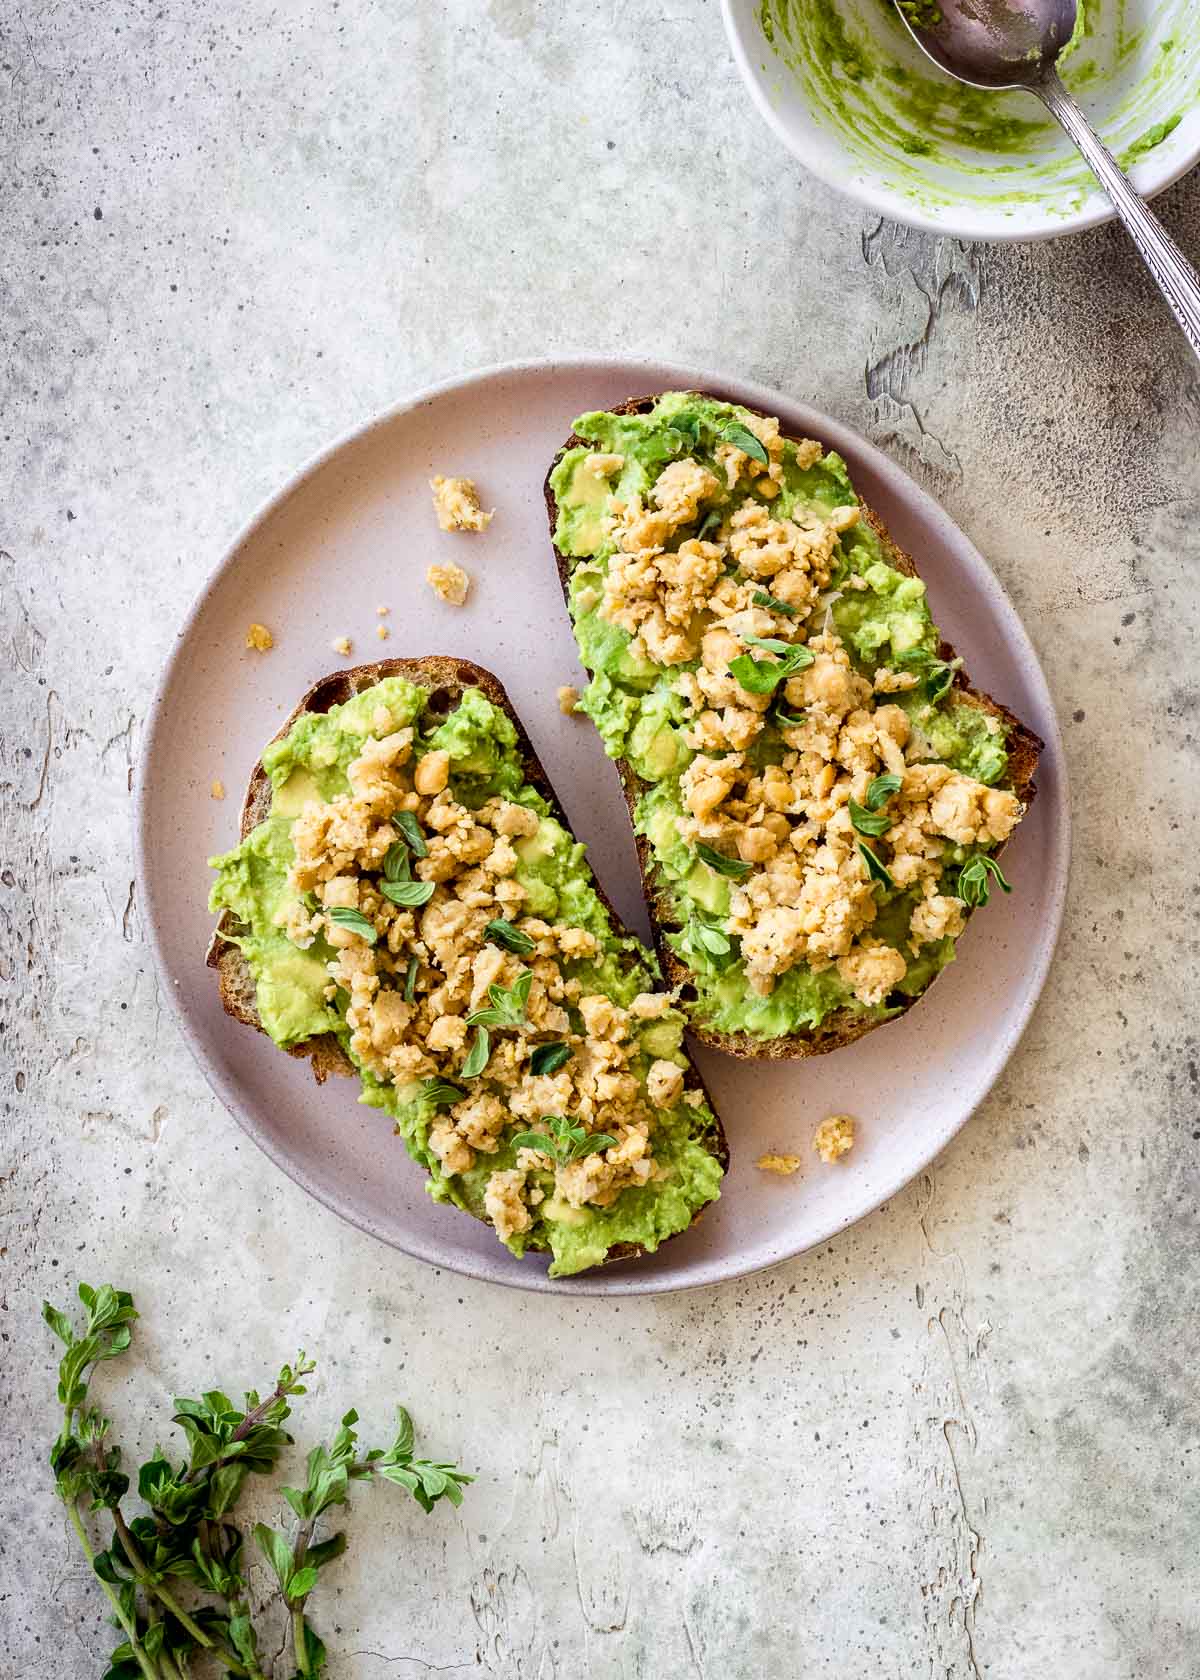 High protein vegan avocado toast with chickpeas, pea shoots and sprouts.